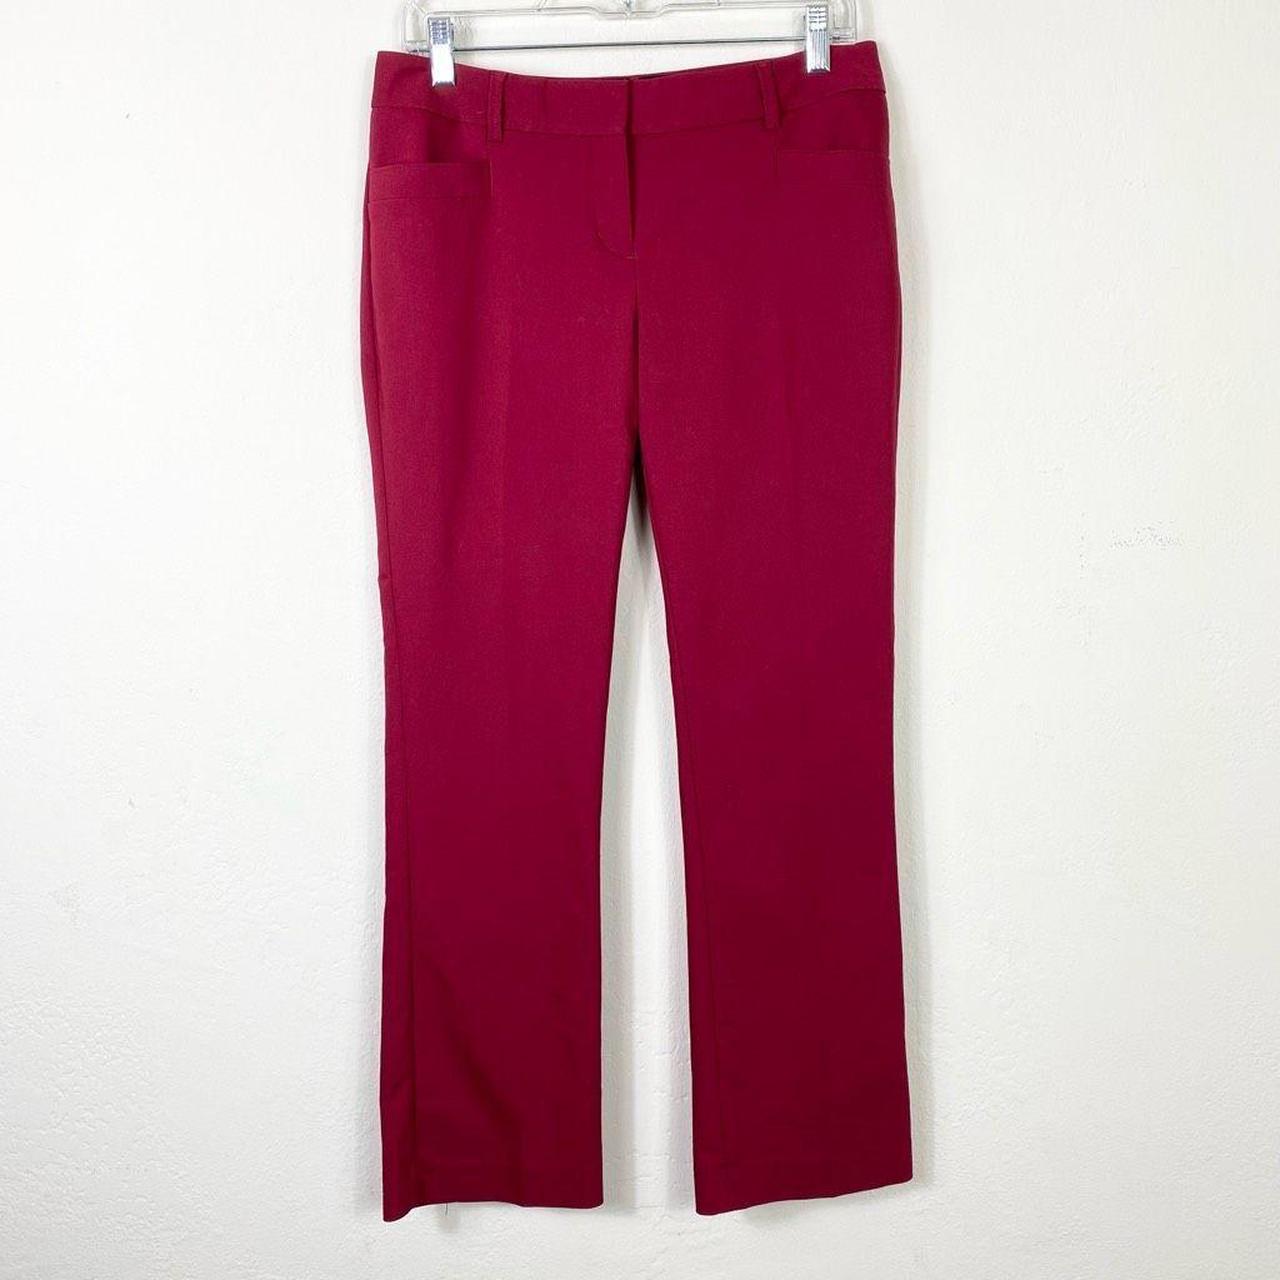 Buy Red Trousers & Pants for Women by AJIO Online | Ajio.com